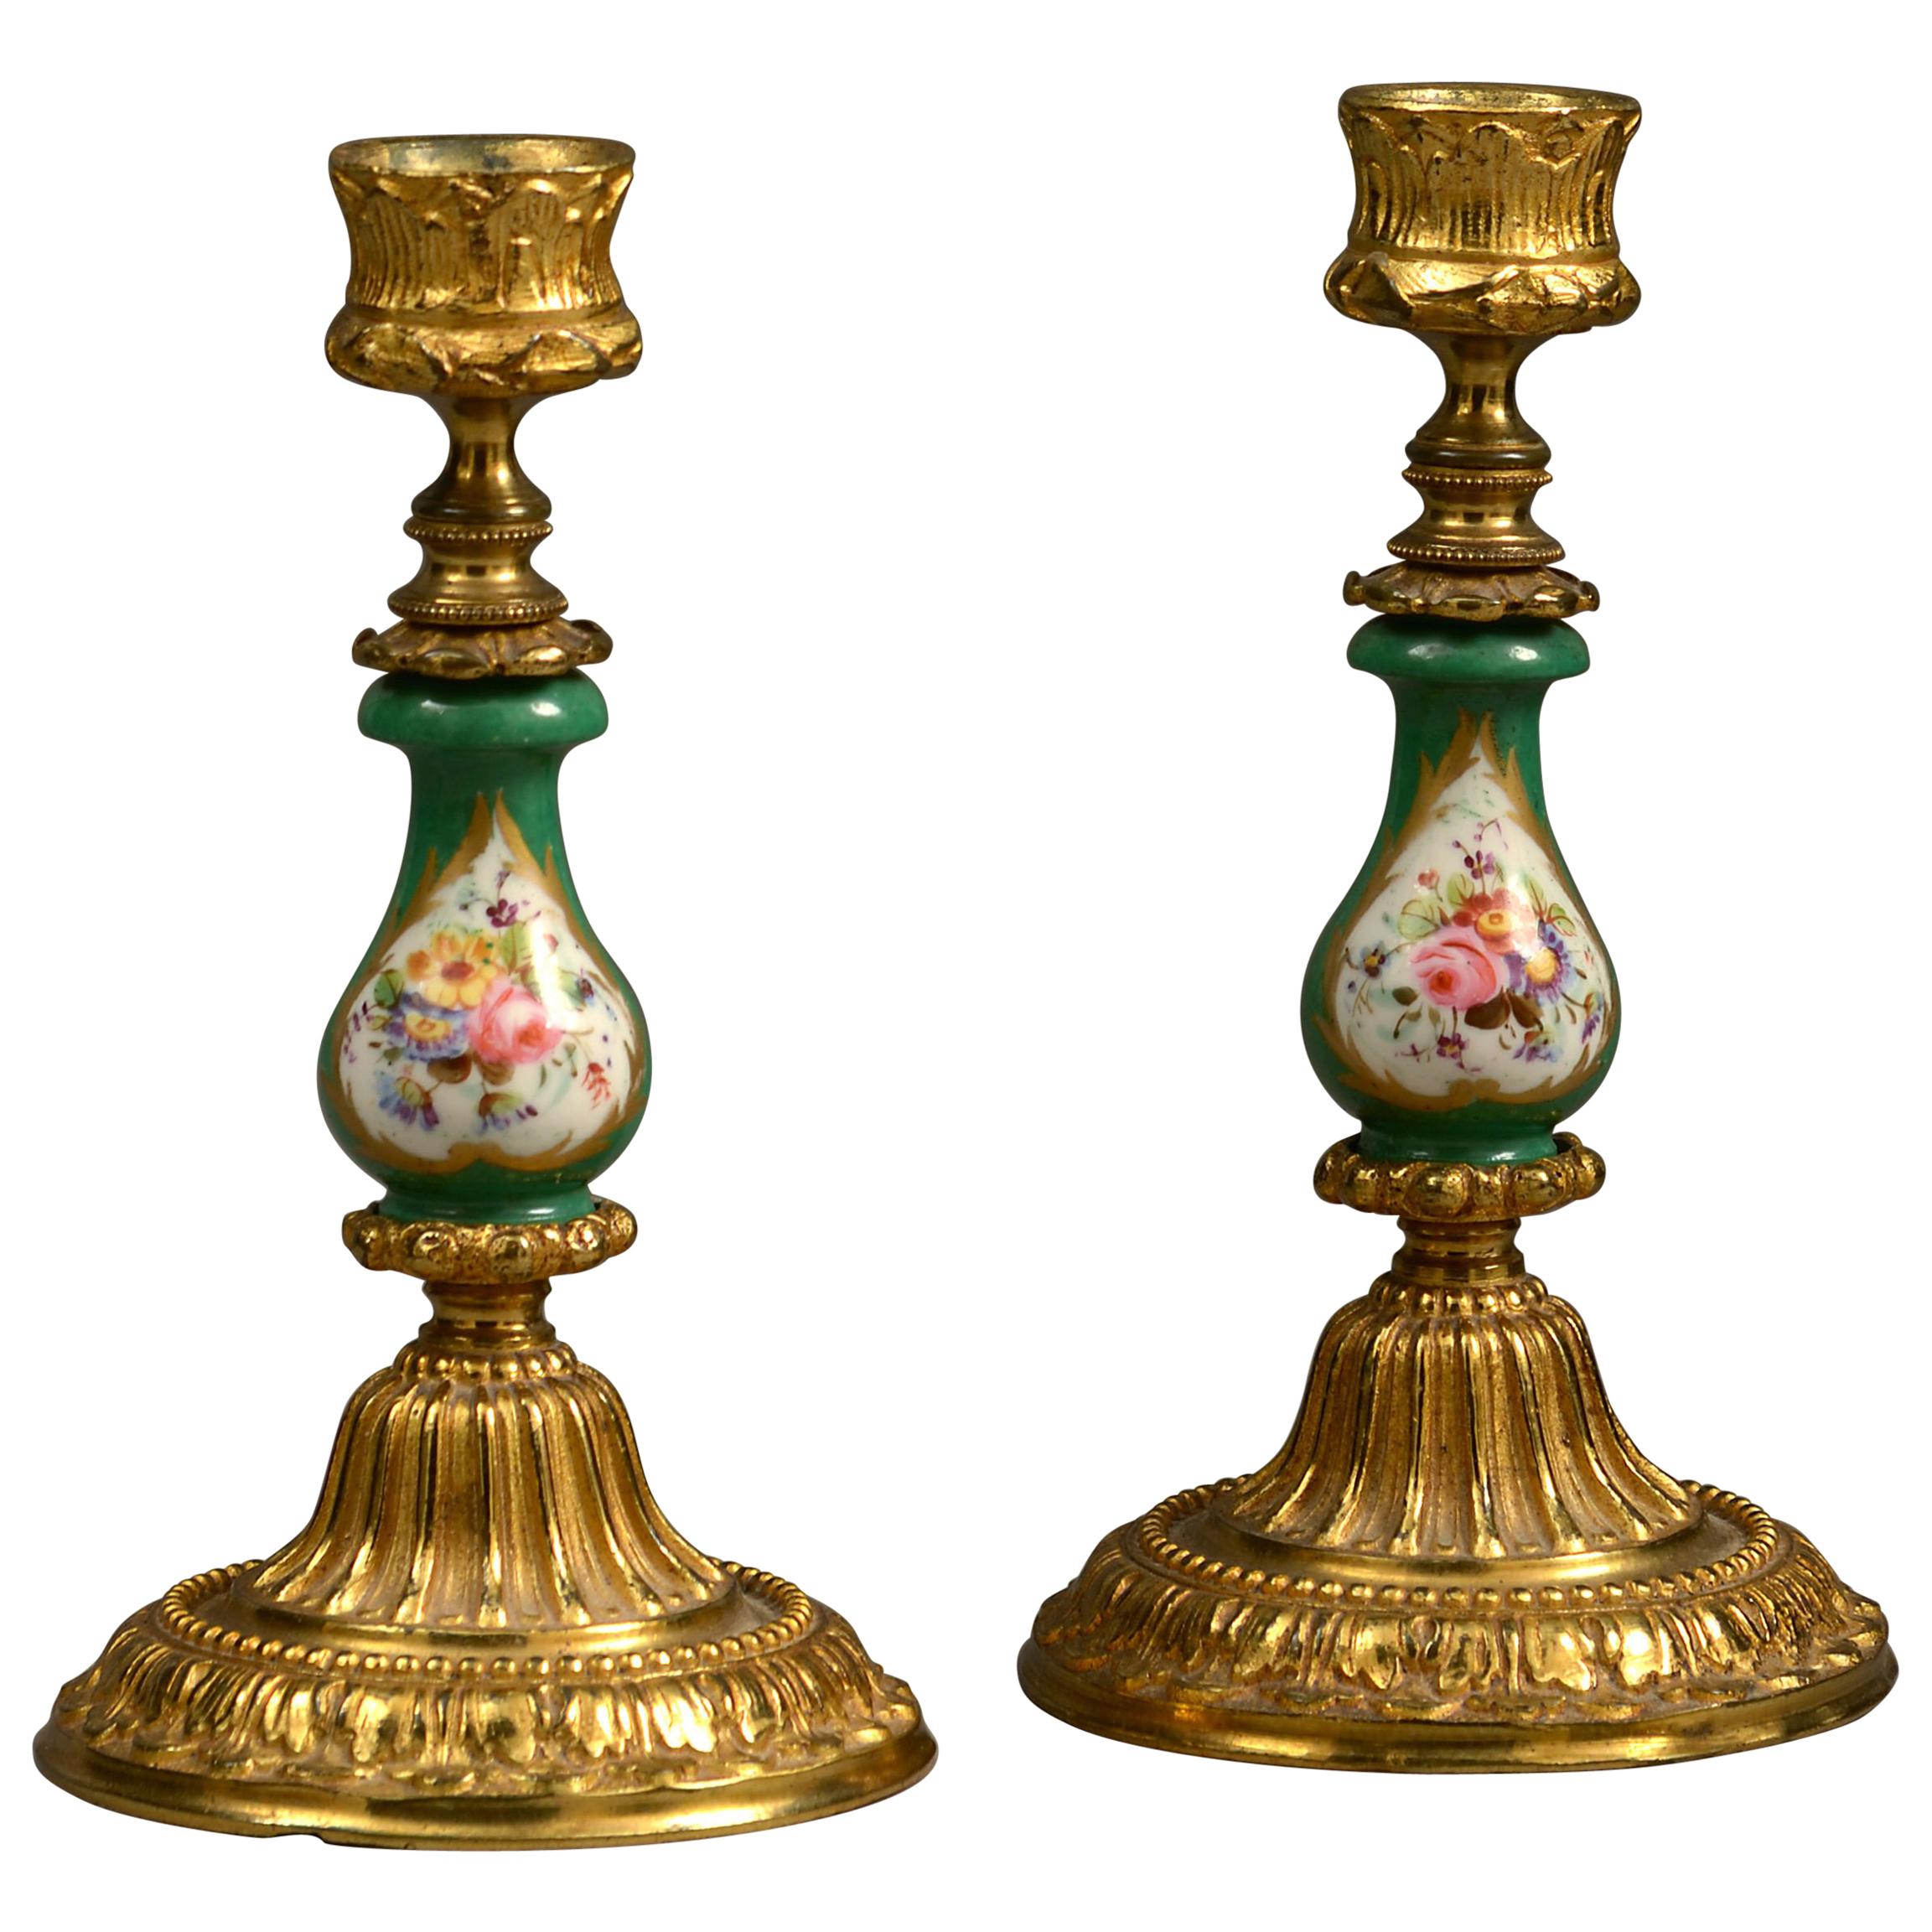 19th Century Pair of Sèvres and Ormolu Candlesticks